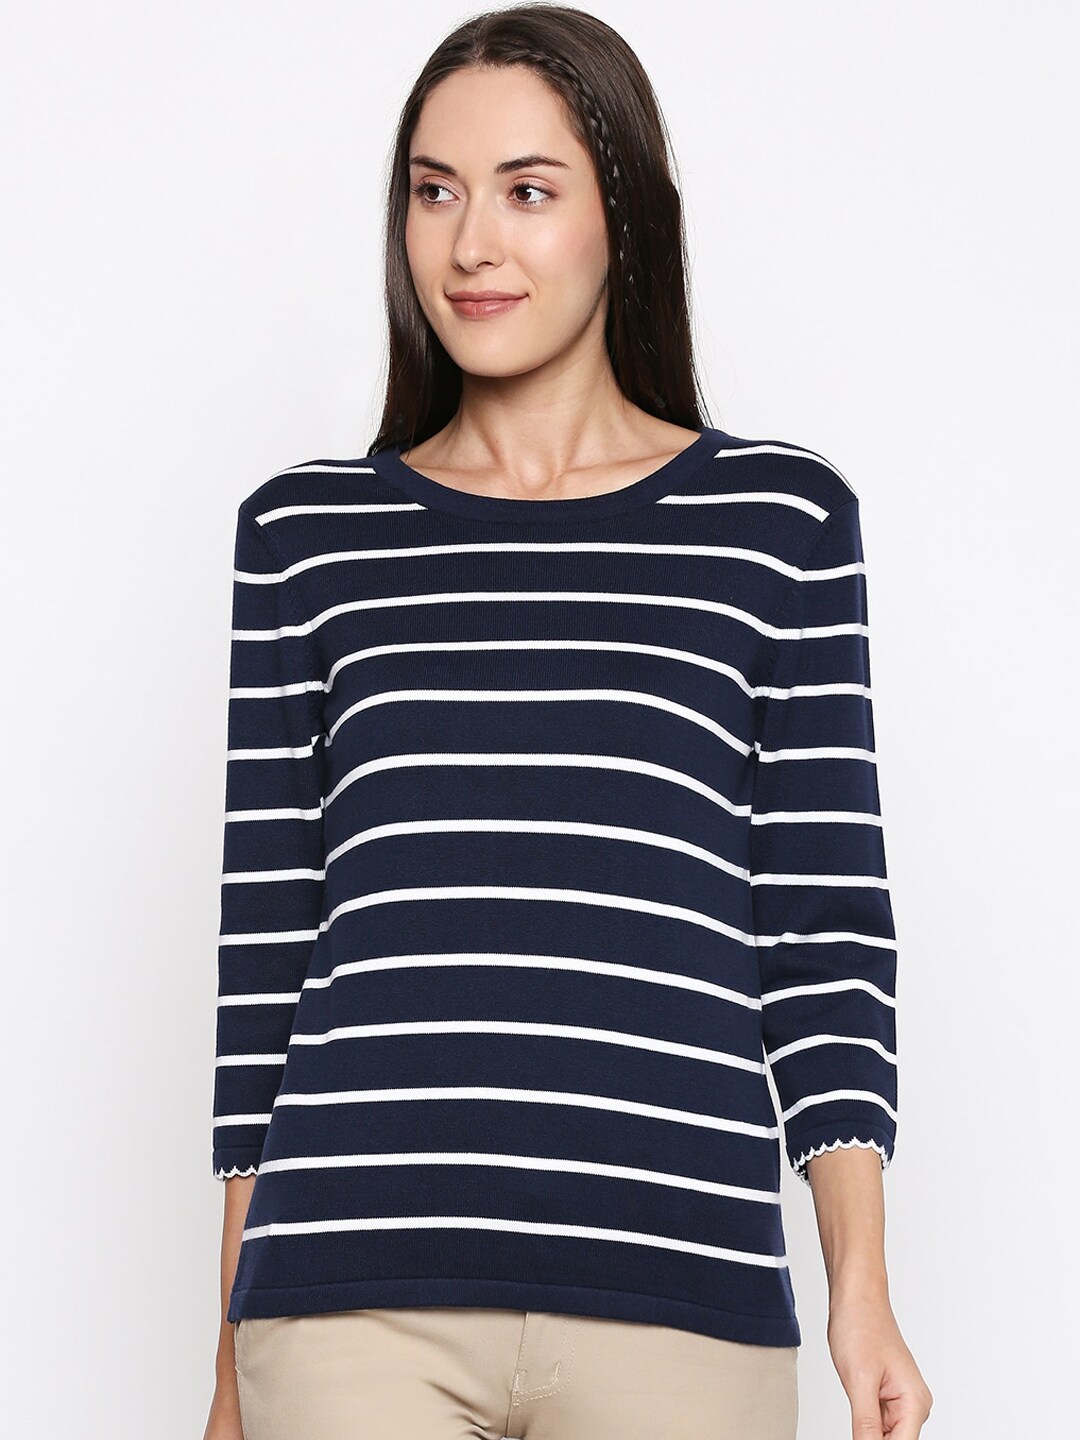 Annabelle by Pantaloons Women Navy Blue & White Striped Pullover Sweater Price in India